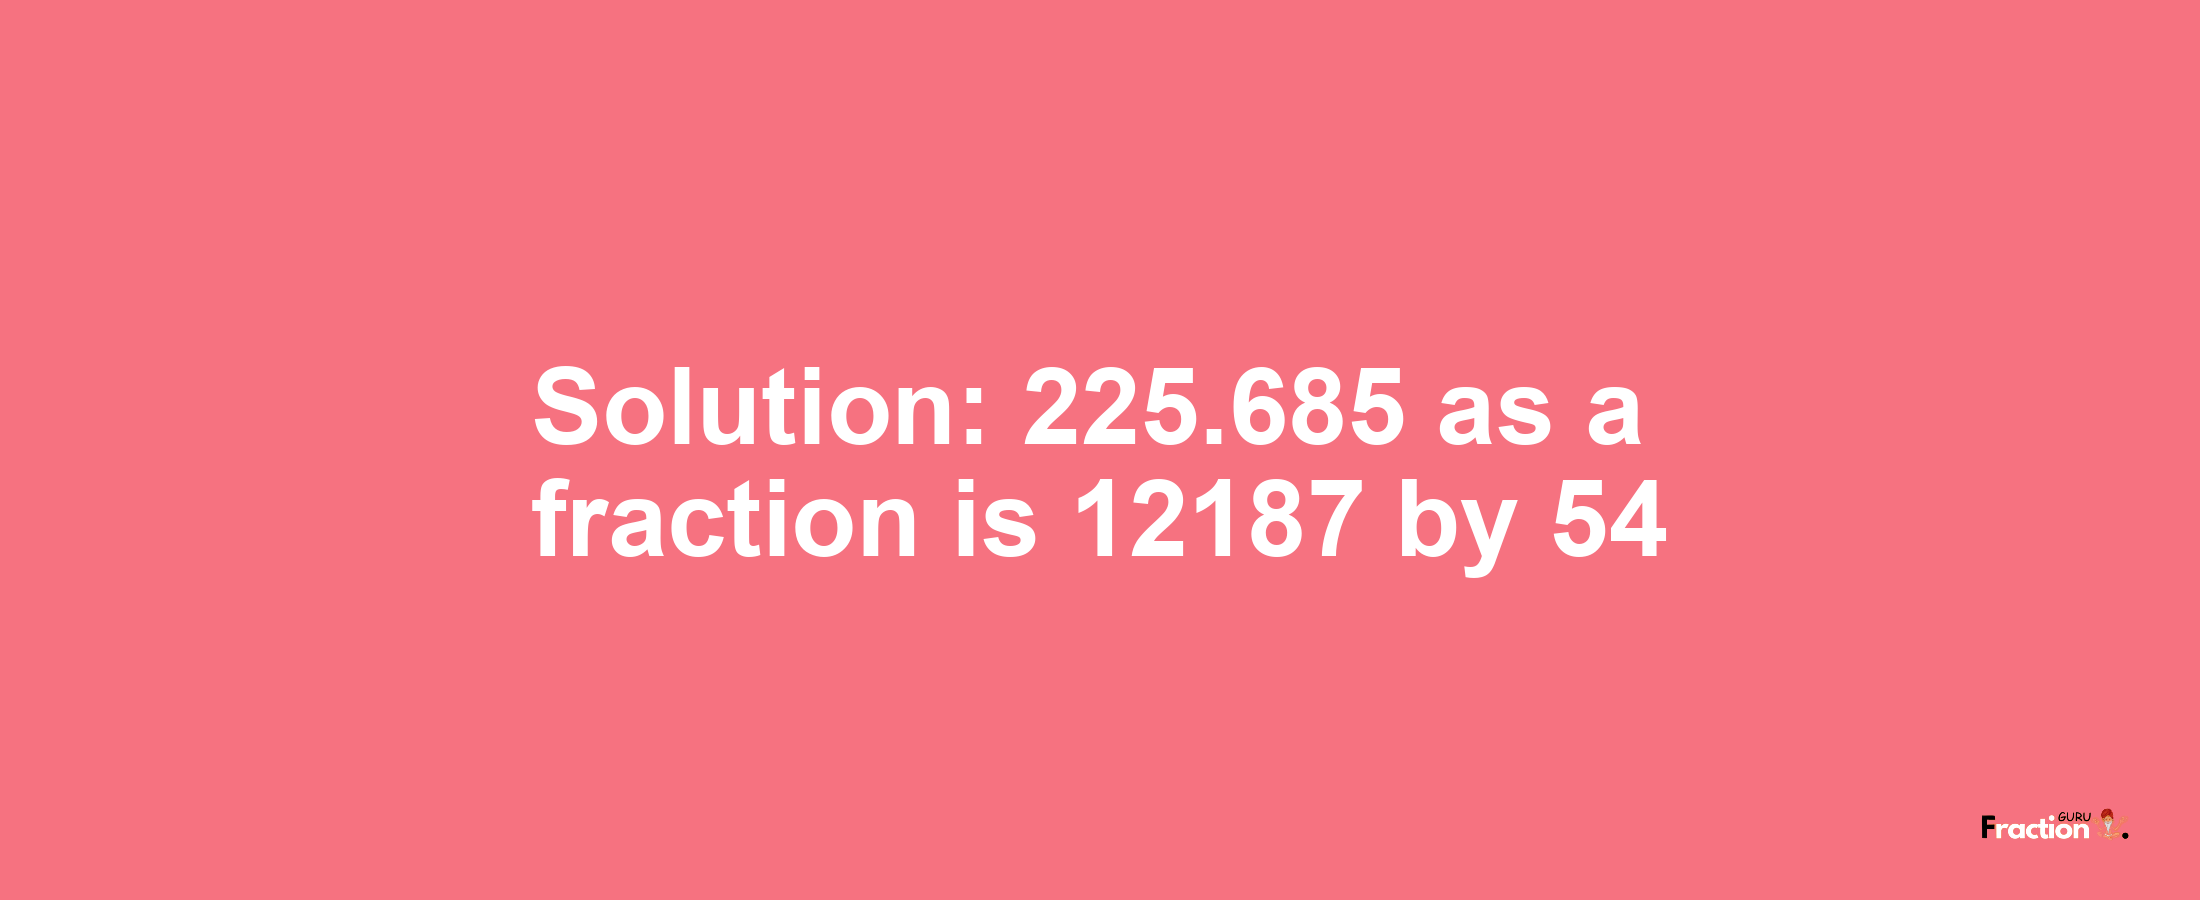 Solution:225.685 as a fraction is 12187/54